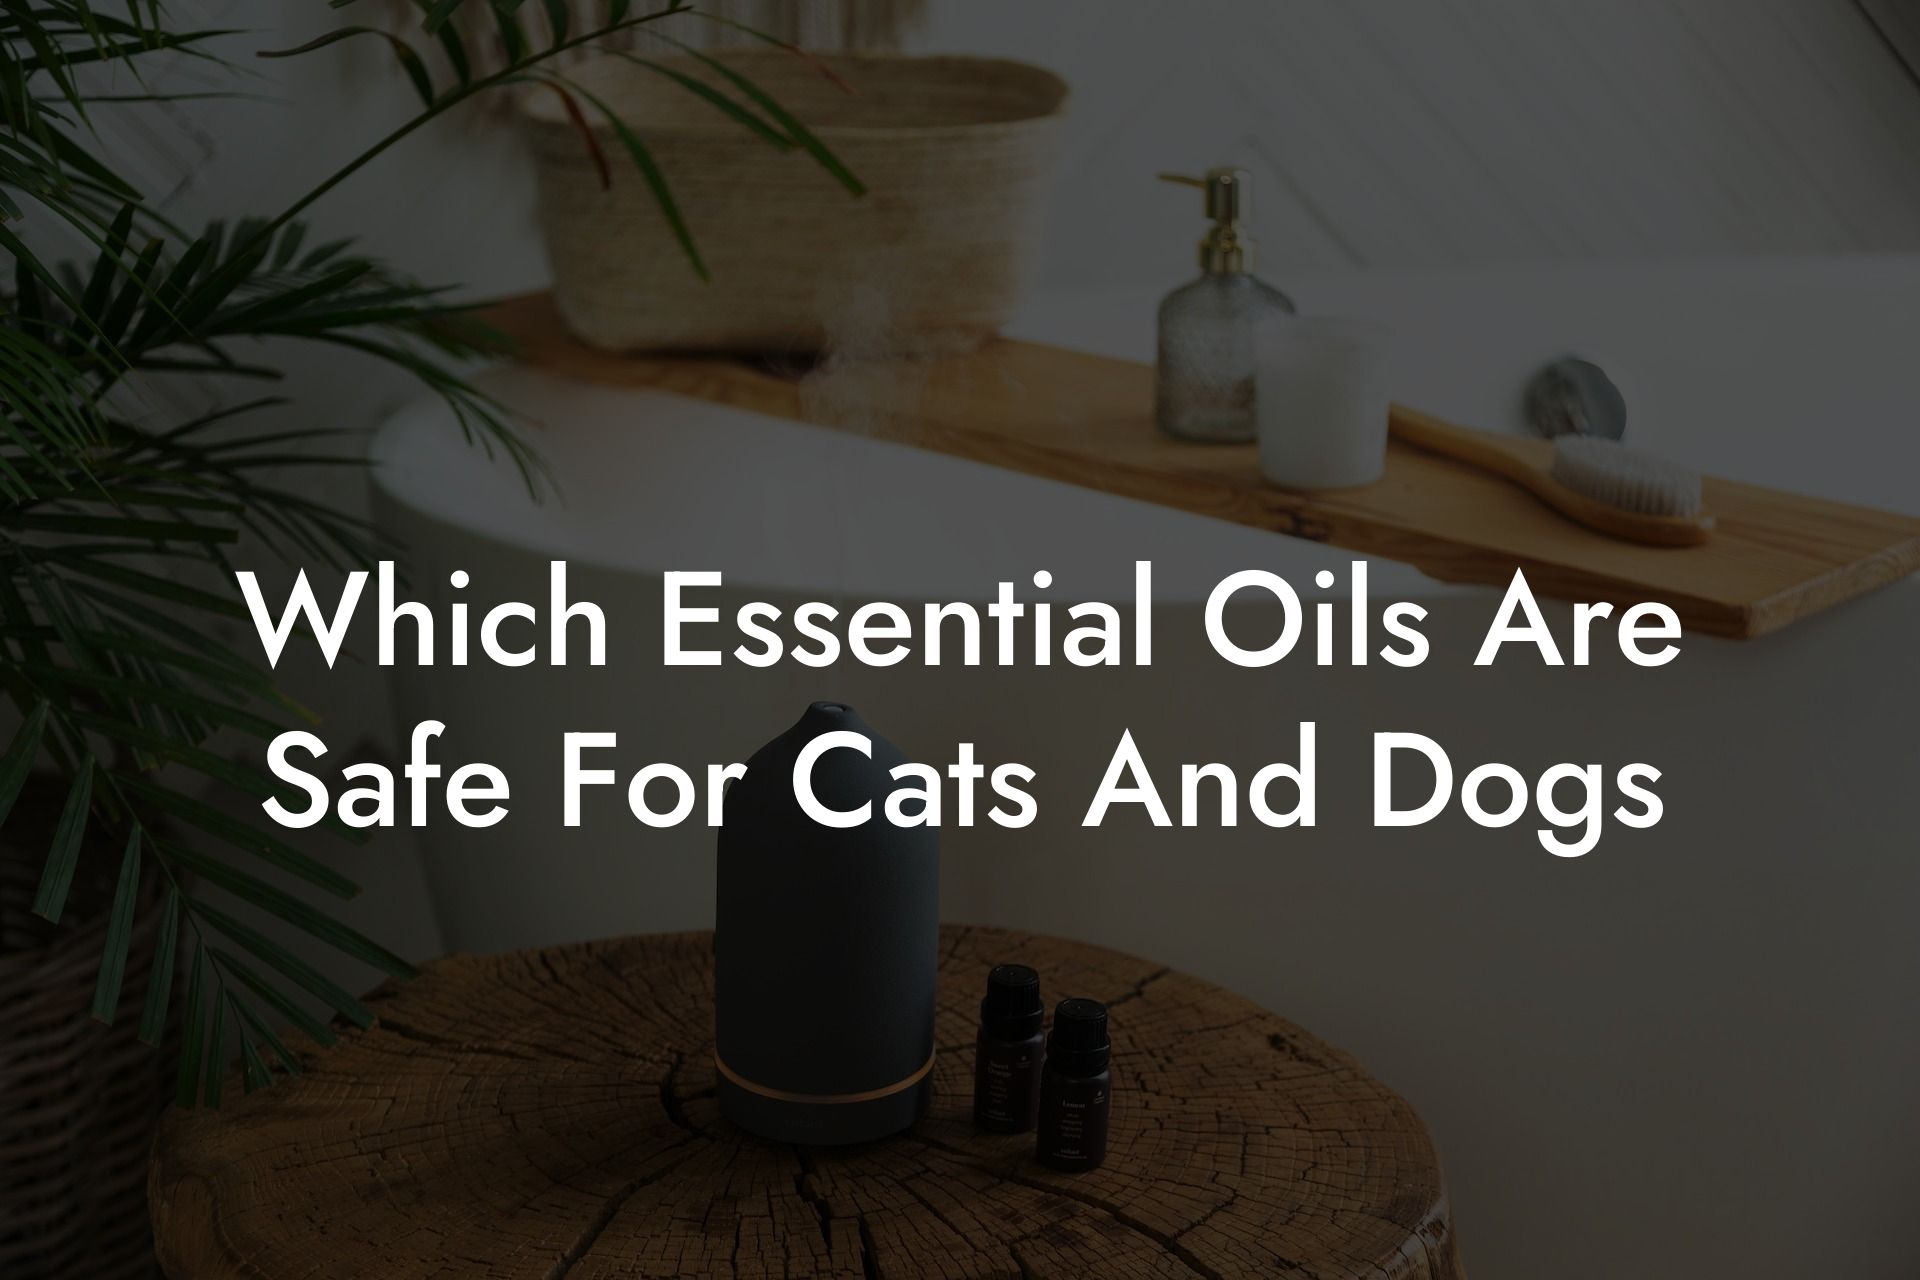 Which Essential Oils Are Safe For Cats And Dogs